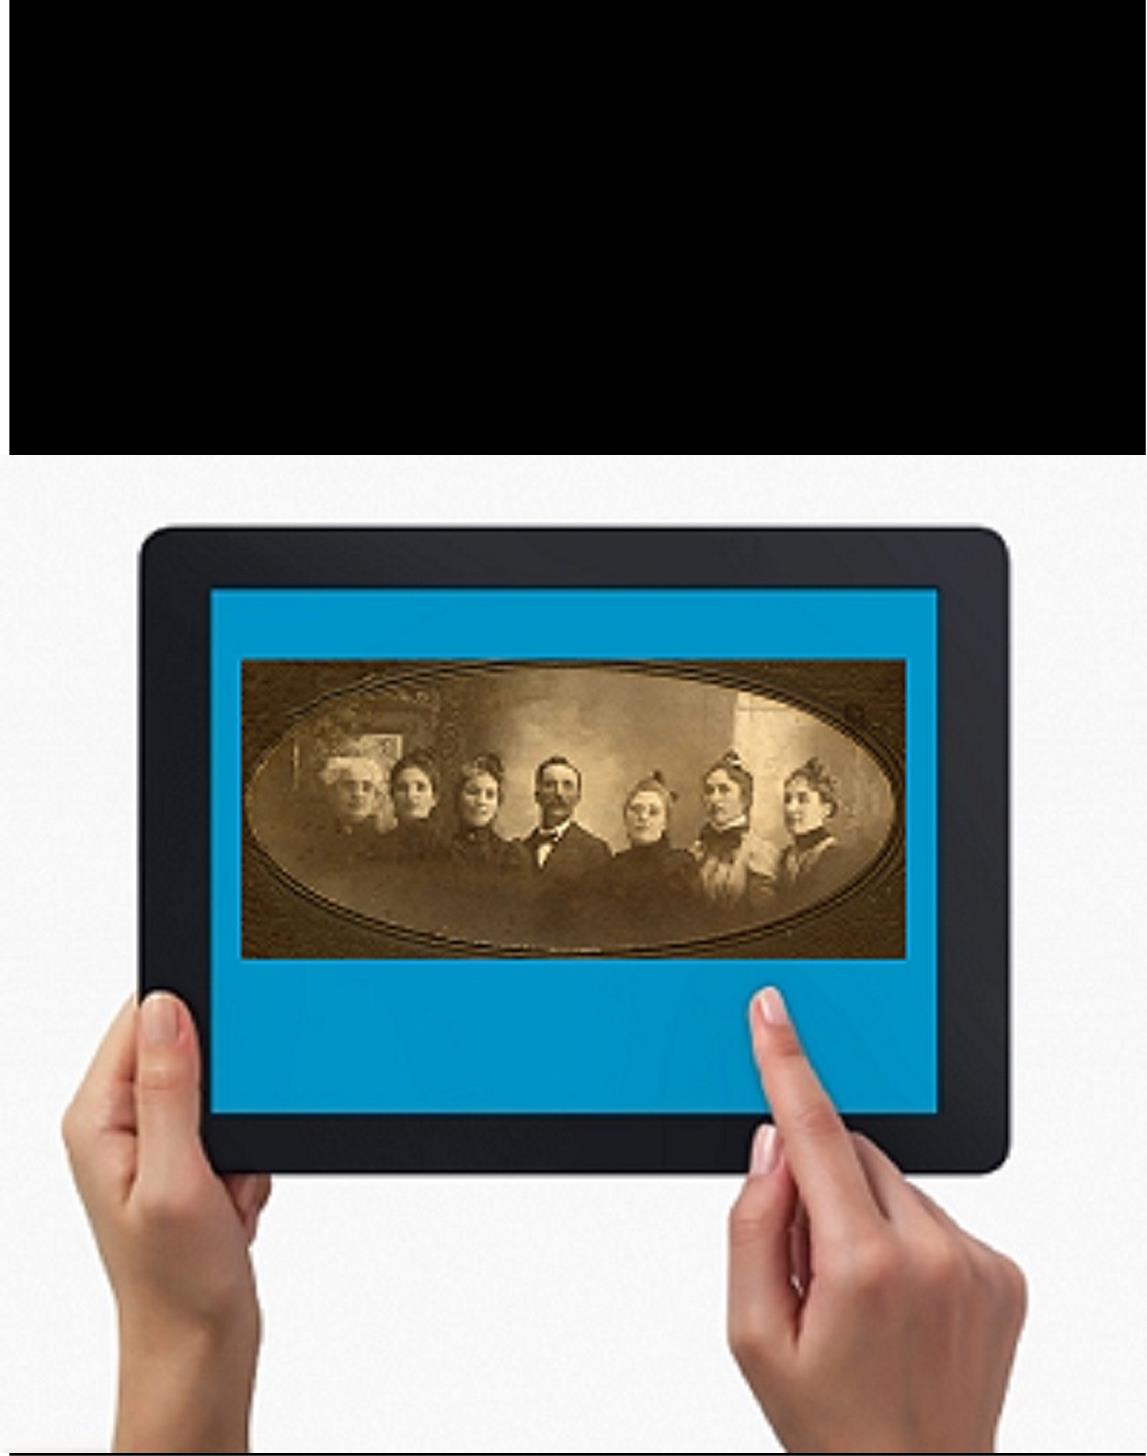 RootsTech 2014: Use your iPad for Genealogy Research at the Family History Library